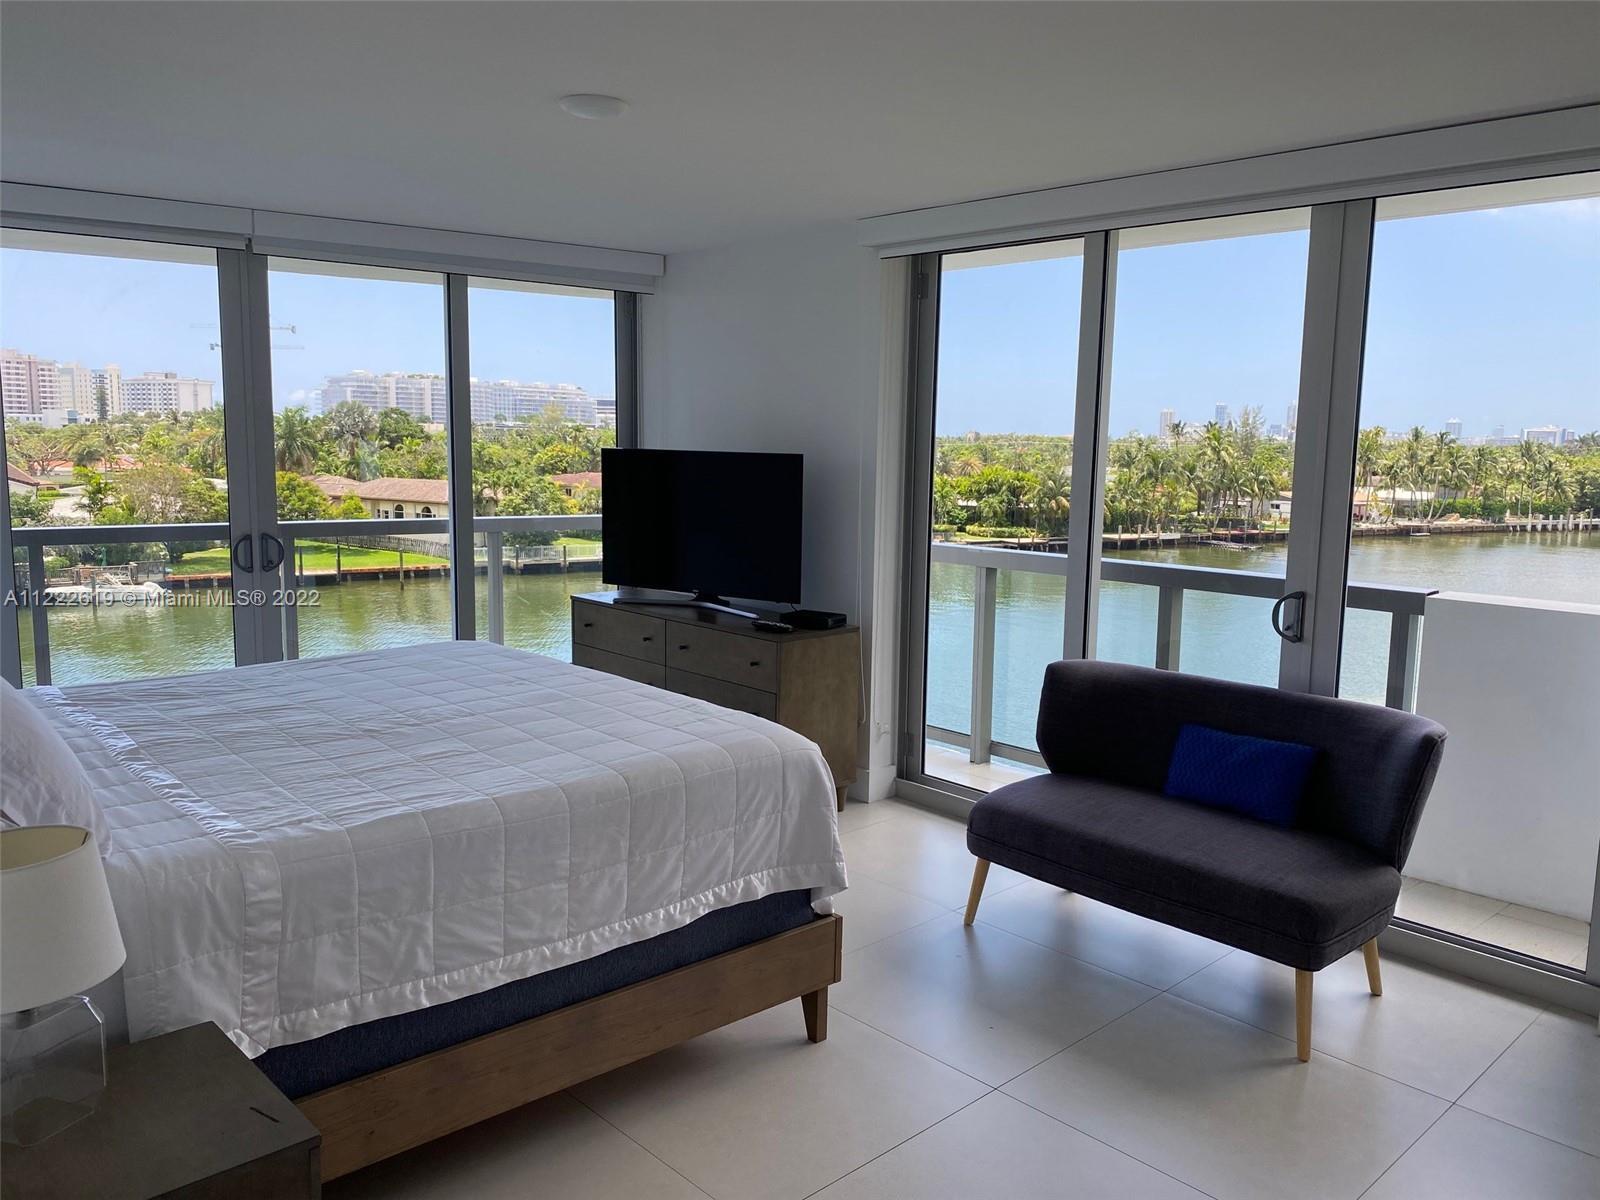 THE IVORY AT BAY HARBOR ISLAND IS A BOUTIQUE RESIDENCES BUILDING, BUILT IN 2017. CORNER UNIT 2 BED -